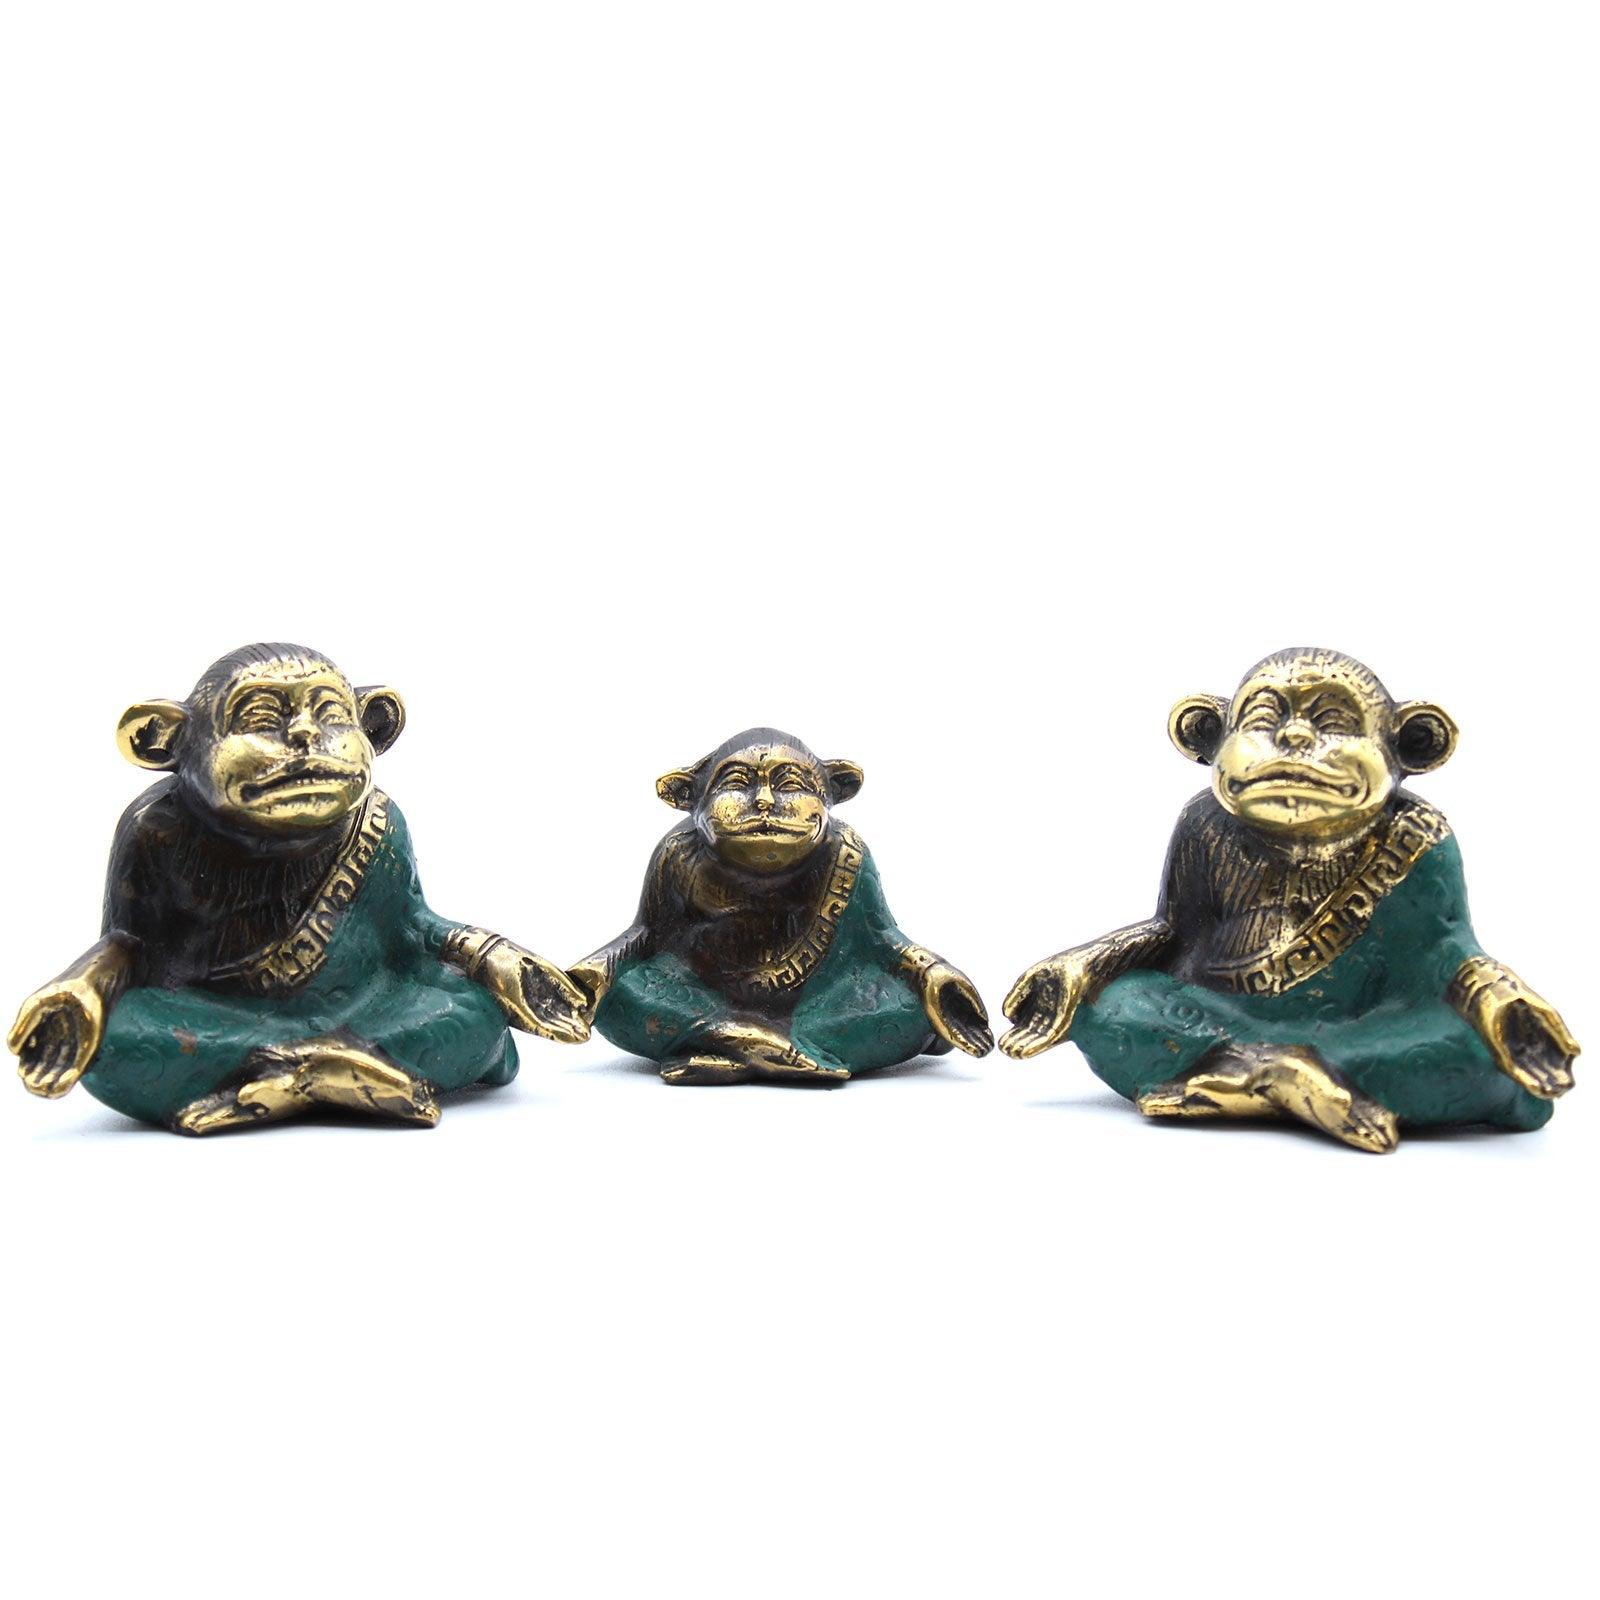 Family of Yoga Monkeys (assorted sizes) - Set of 3 - Charming Spaces